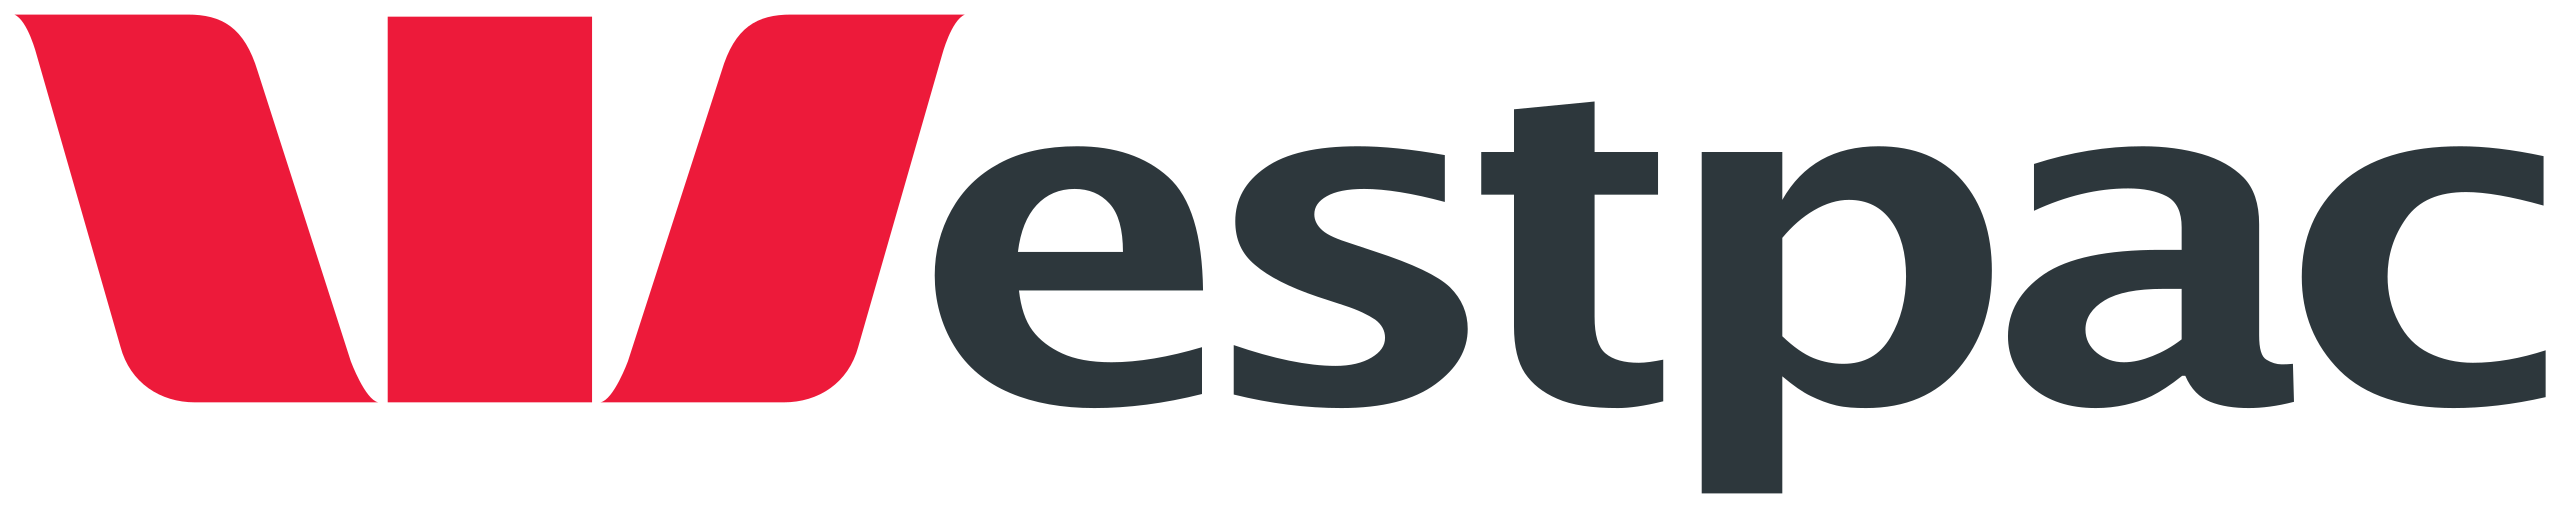 File:Westpac logo.svg - Wikimedia Commons